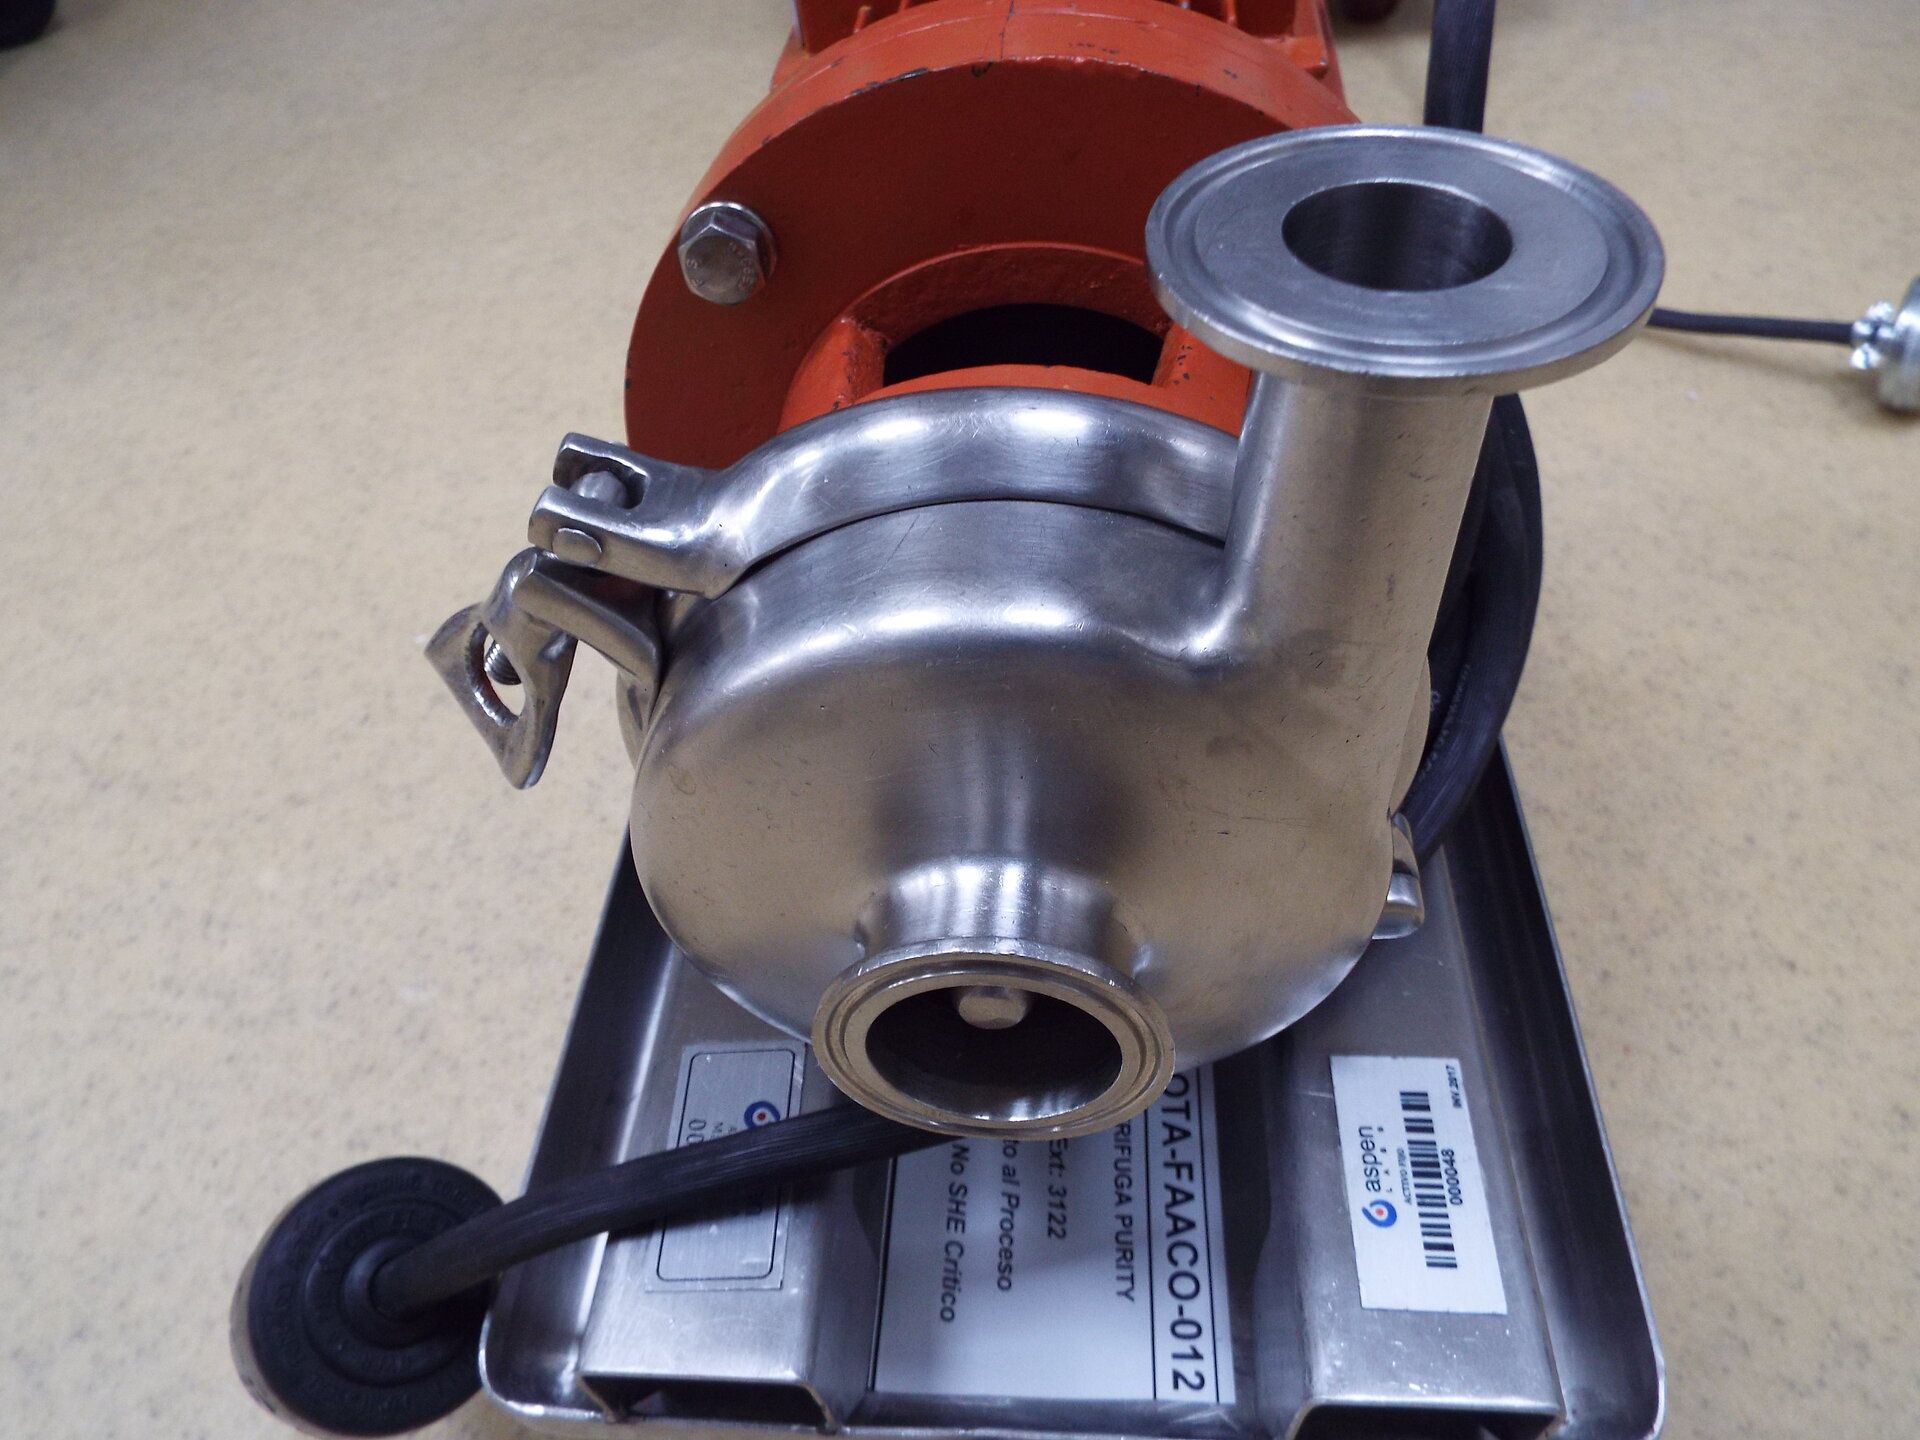 Stainless steel centrifgual pump with 4" diameter impeller stainless steel base on casters - Image 2 of 2